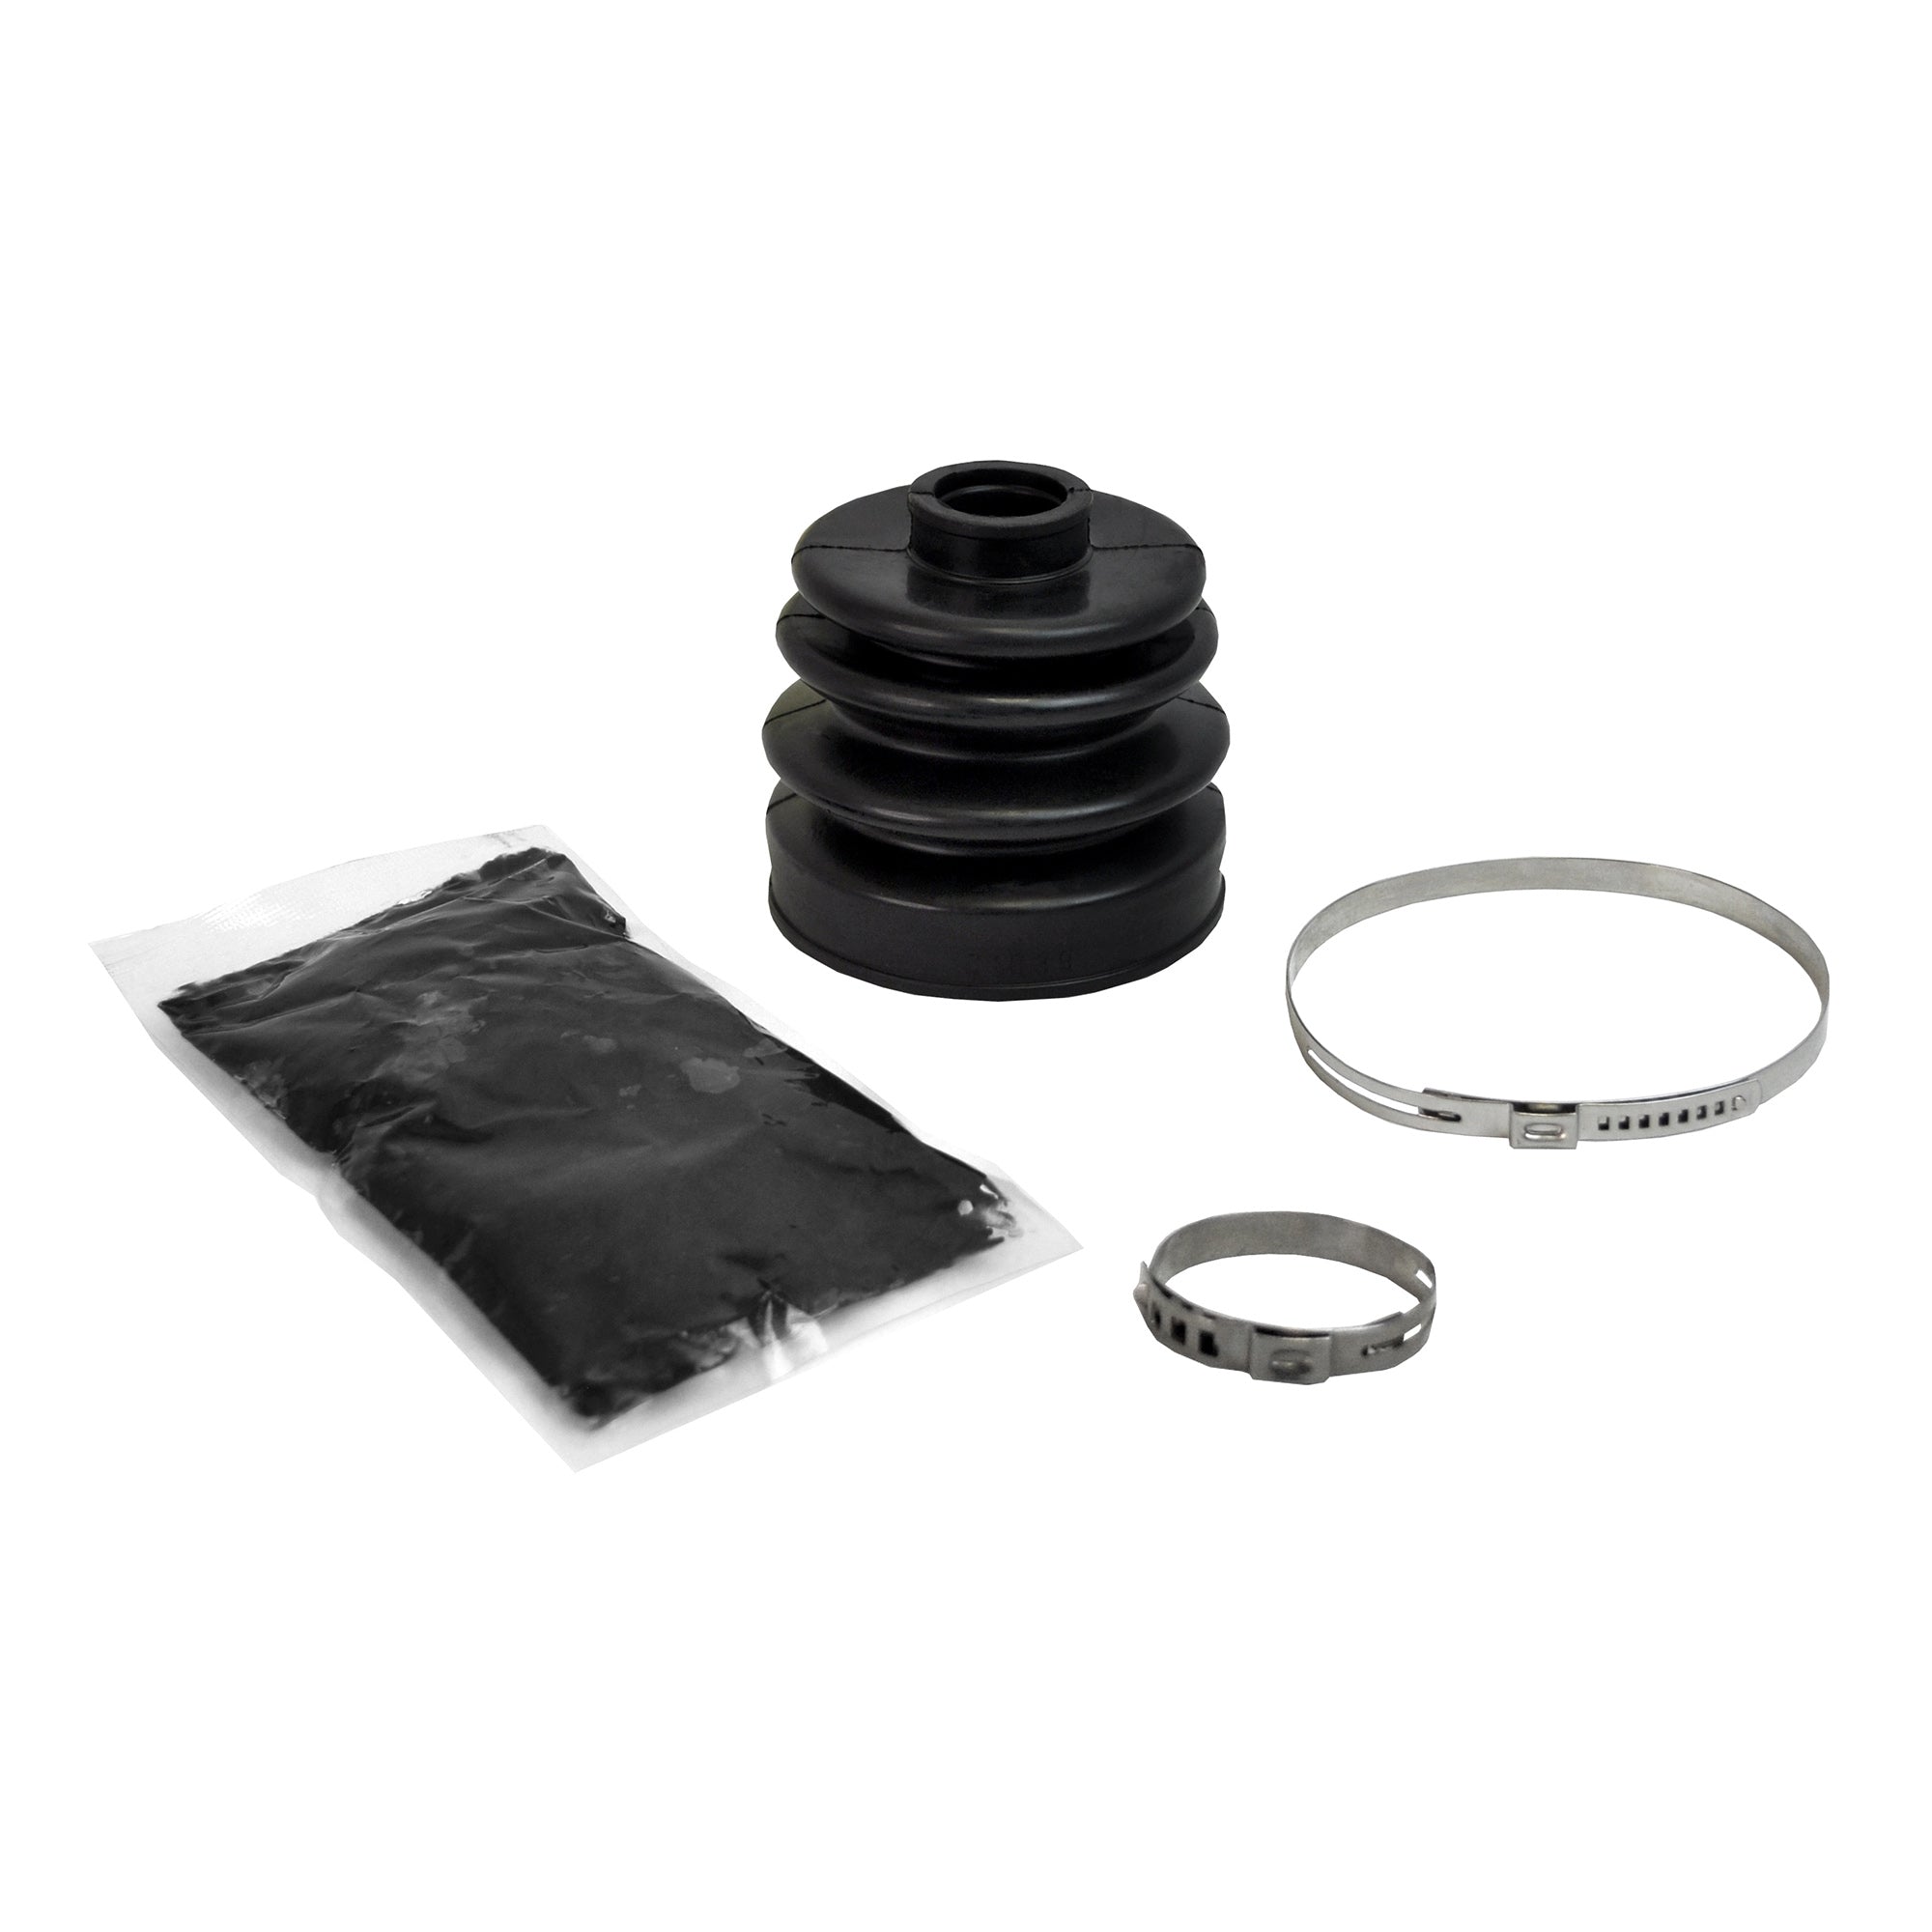 Polaris Xpedition 425 Rugged OE Replacement Boot Kit